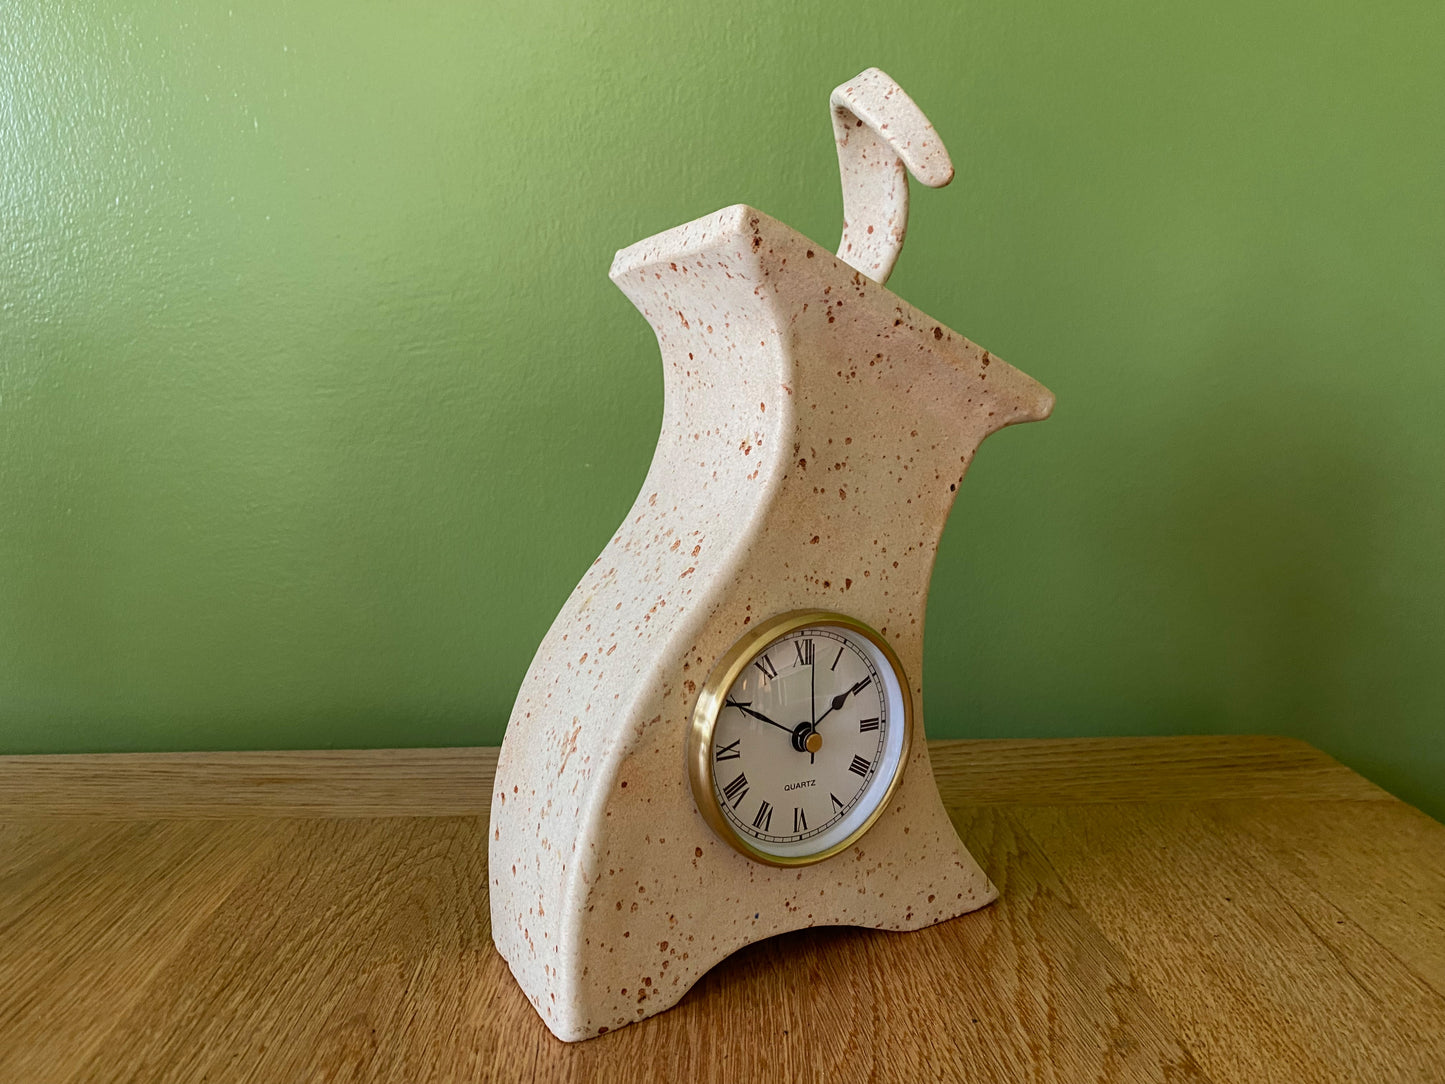 Ceramic Mantel Clock with Enclosed Face - Oatmeal Speckle